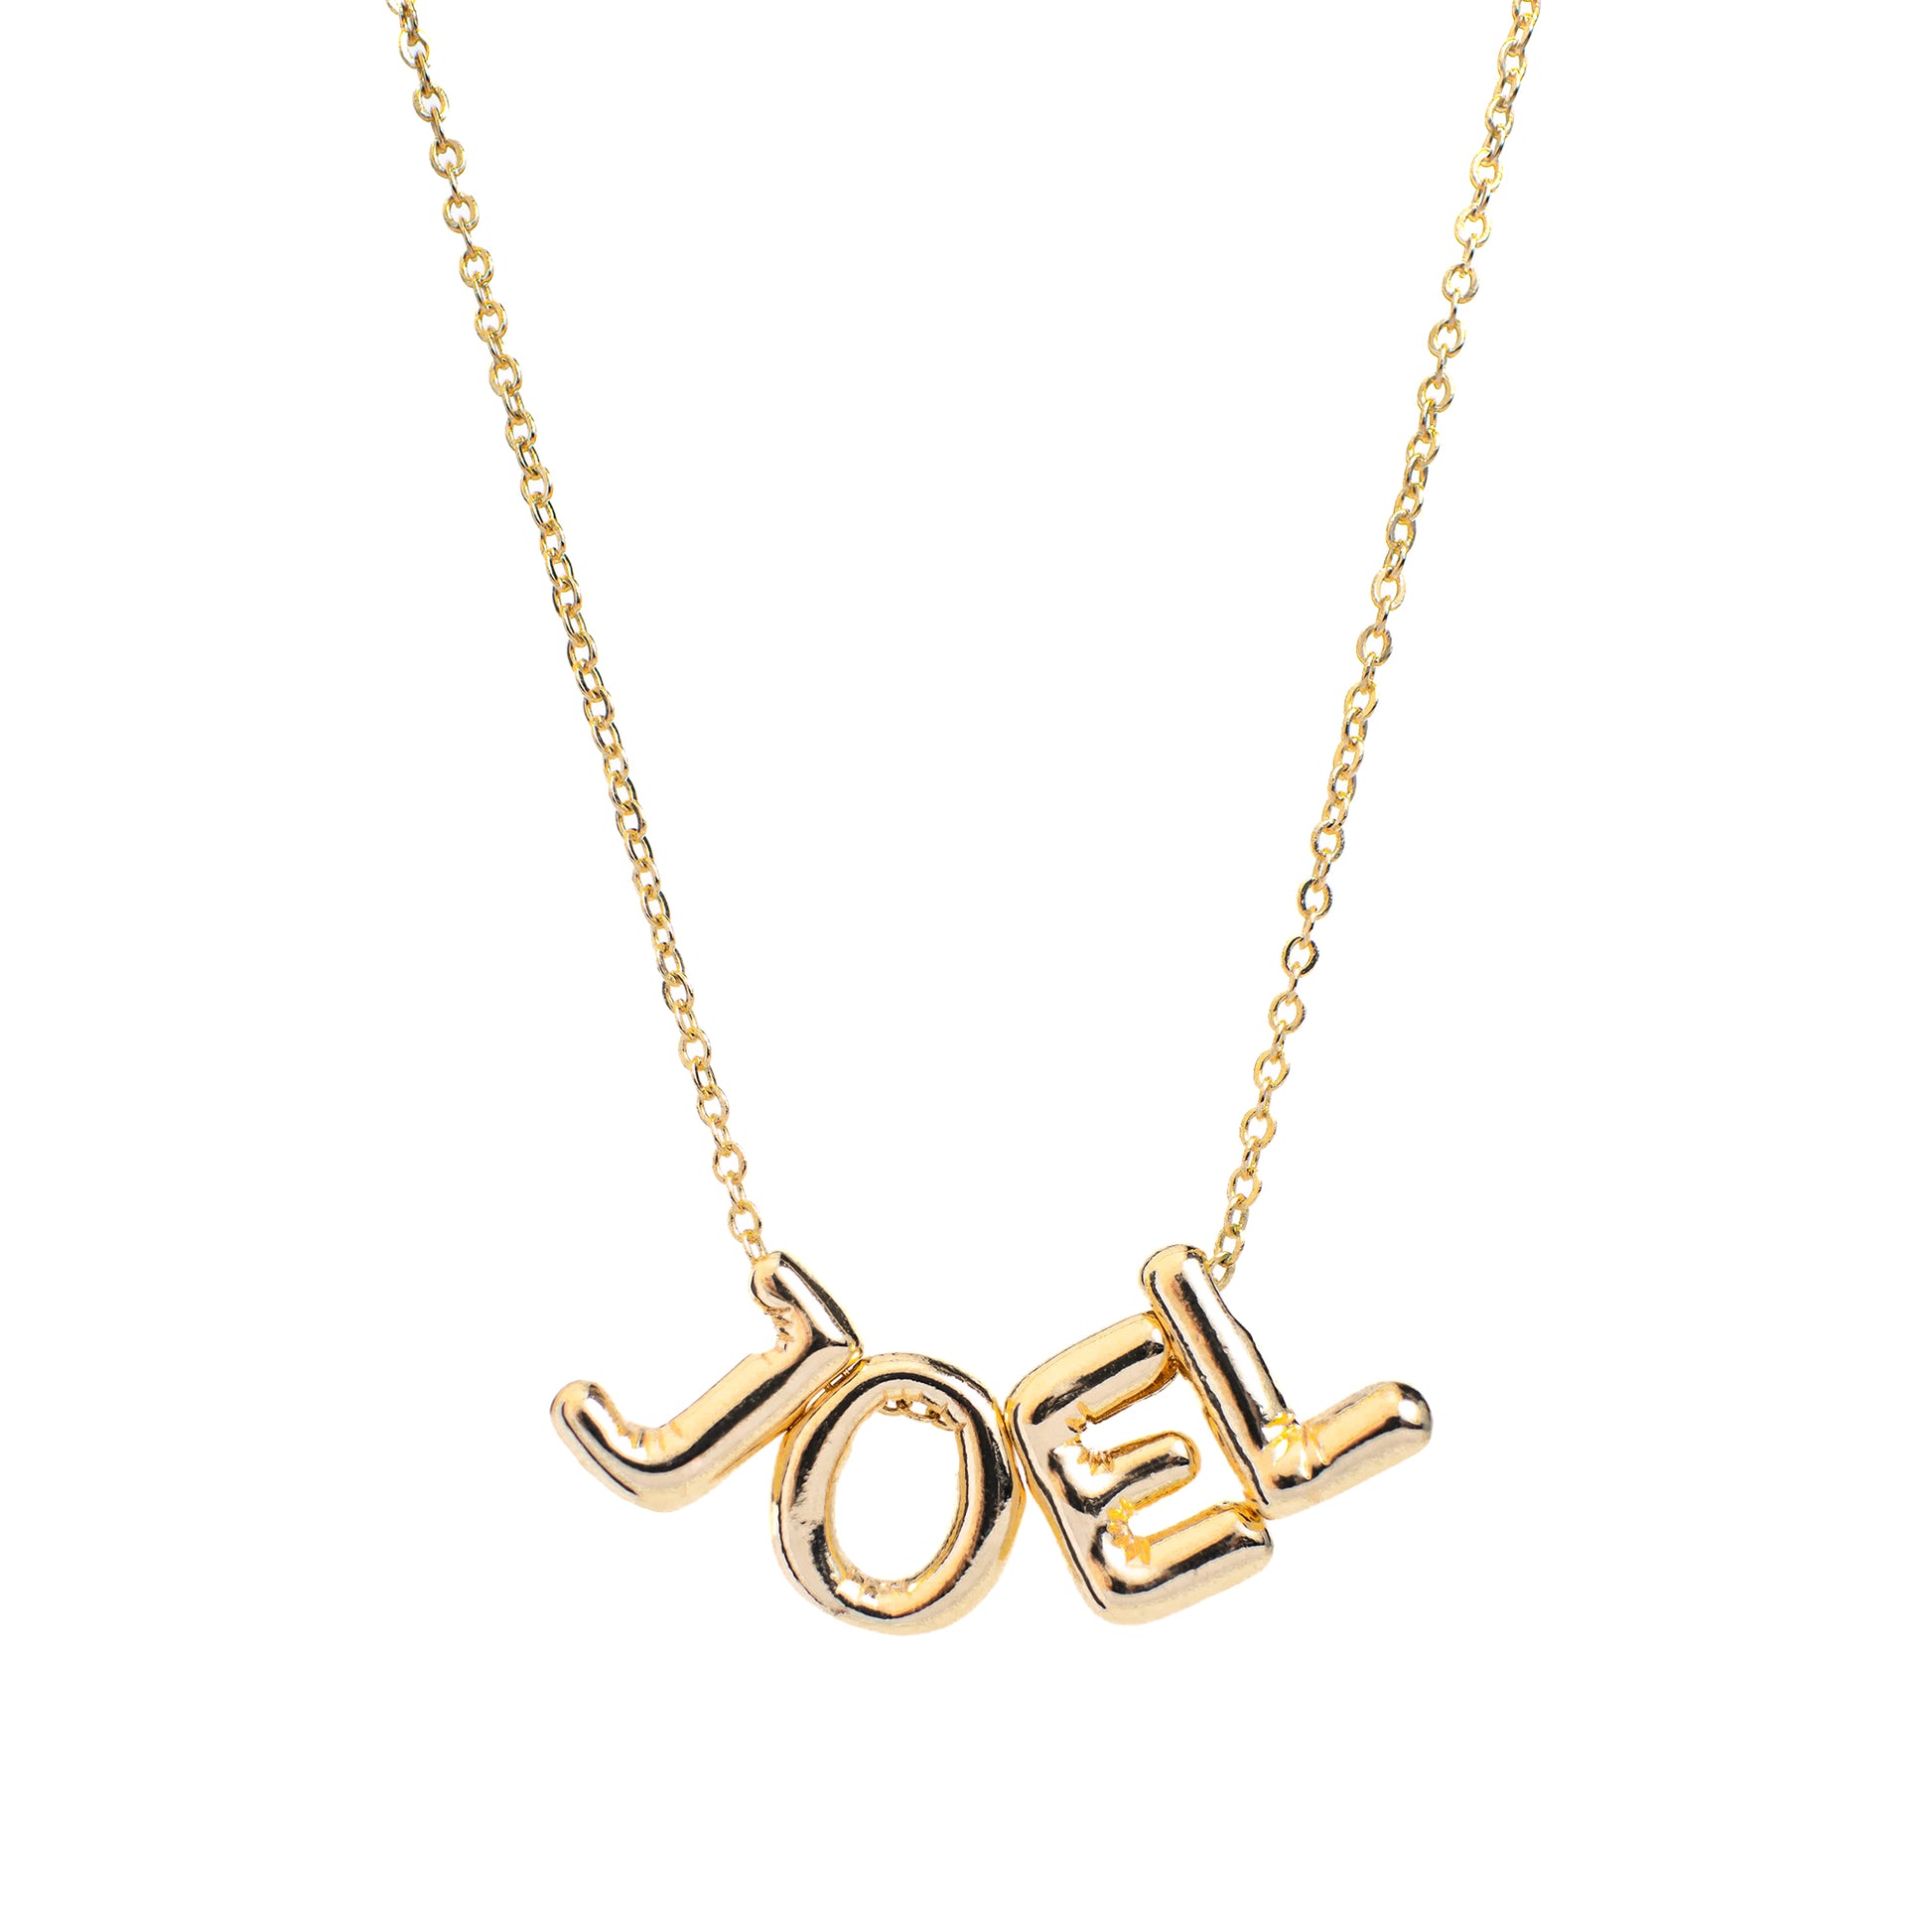 This photo features with a mini JOEL letter pendant.